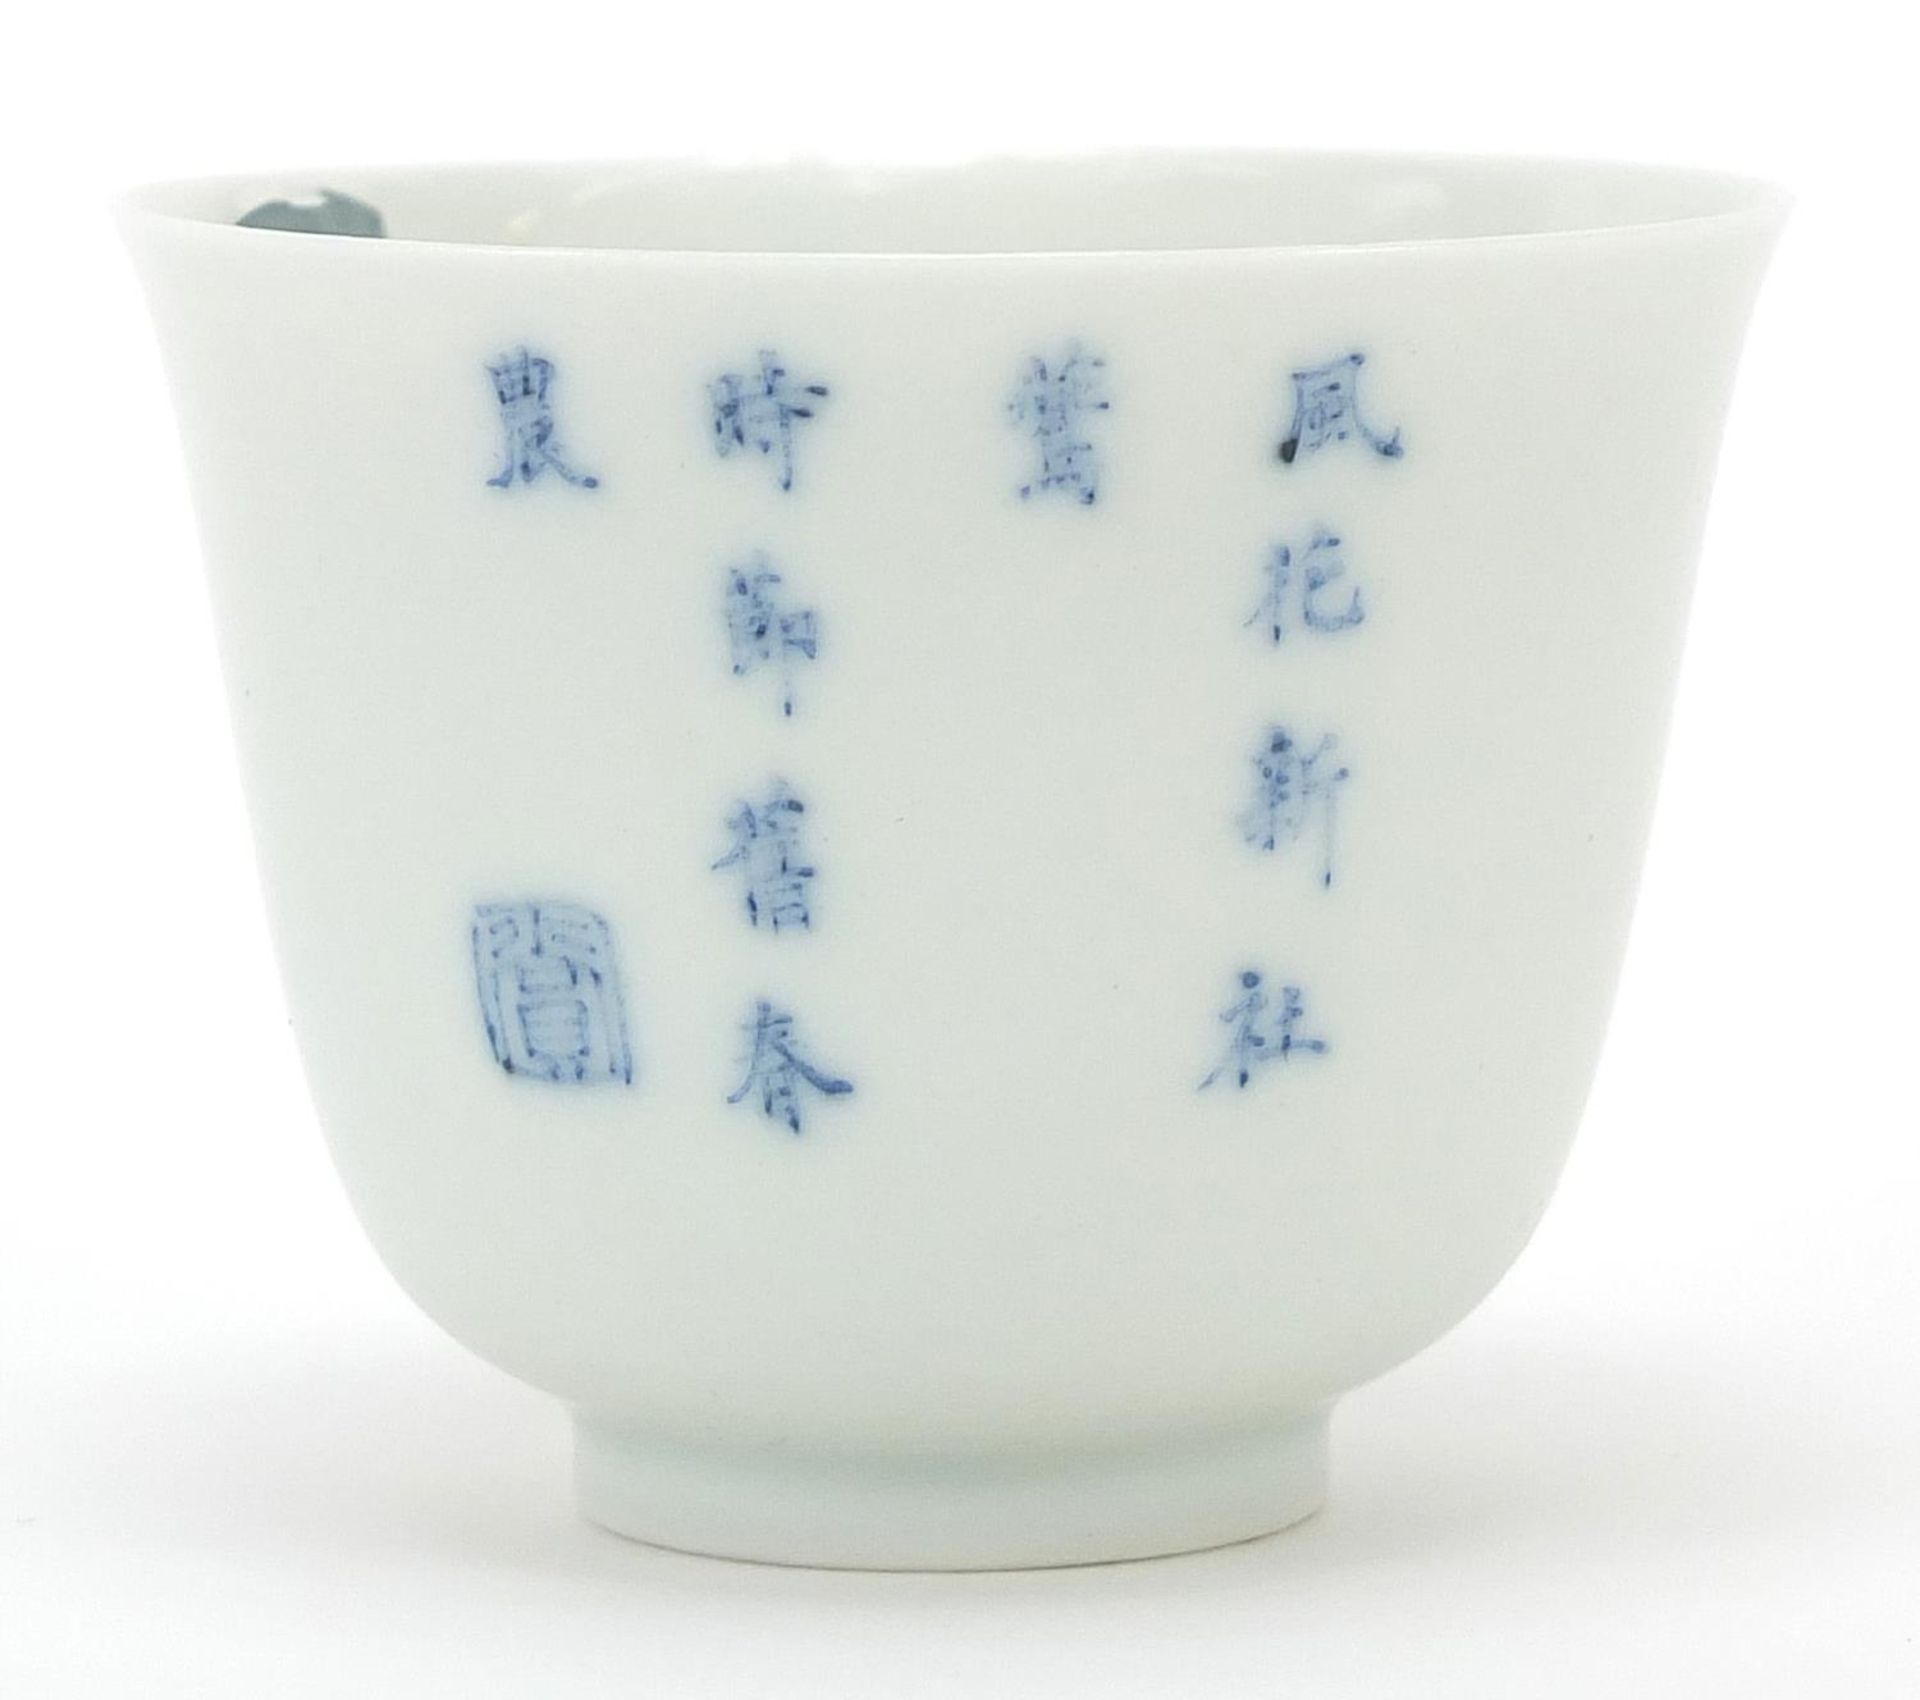 Chinese blue and white porcelain tea bowl hand painted with calligraphy, six figure character - Image 2 of 4